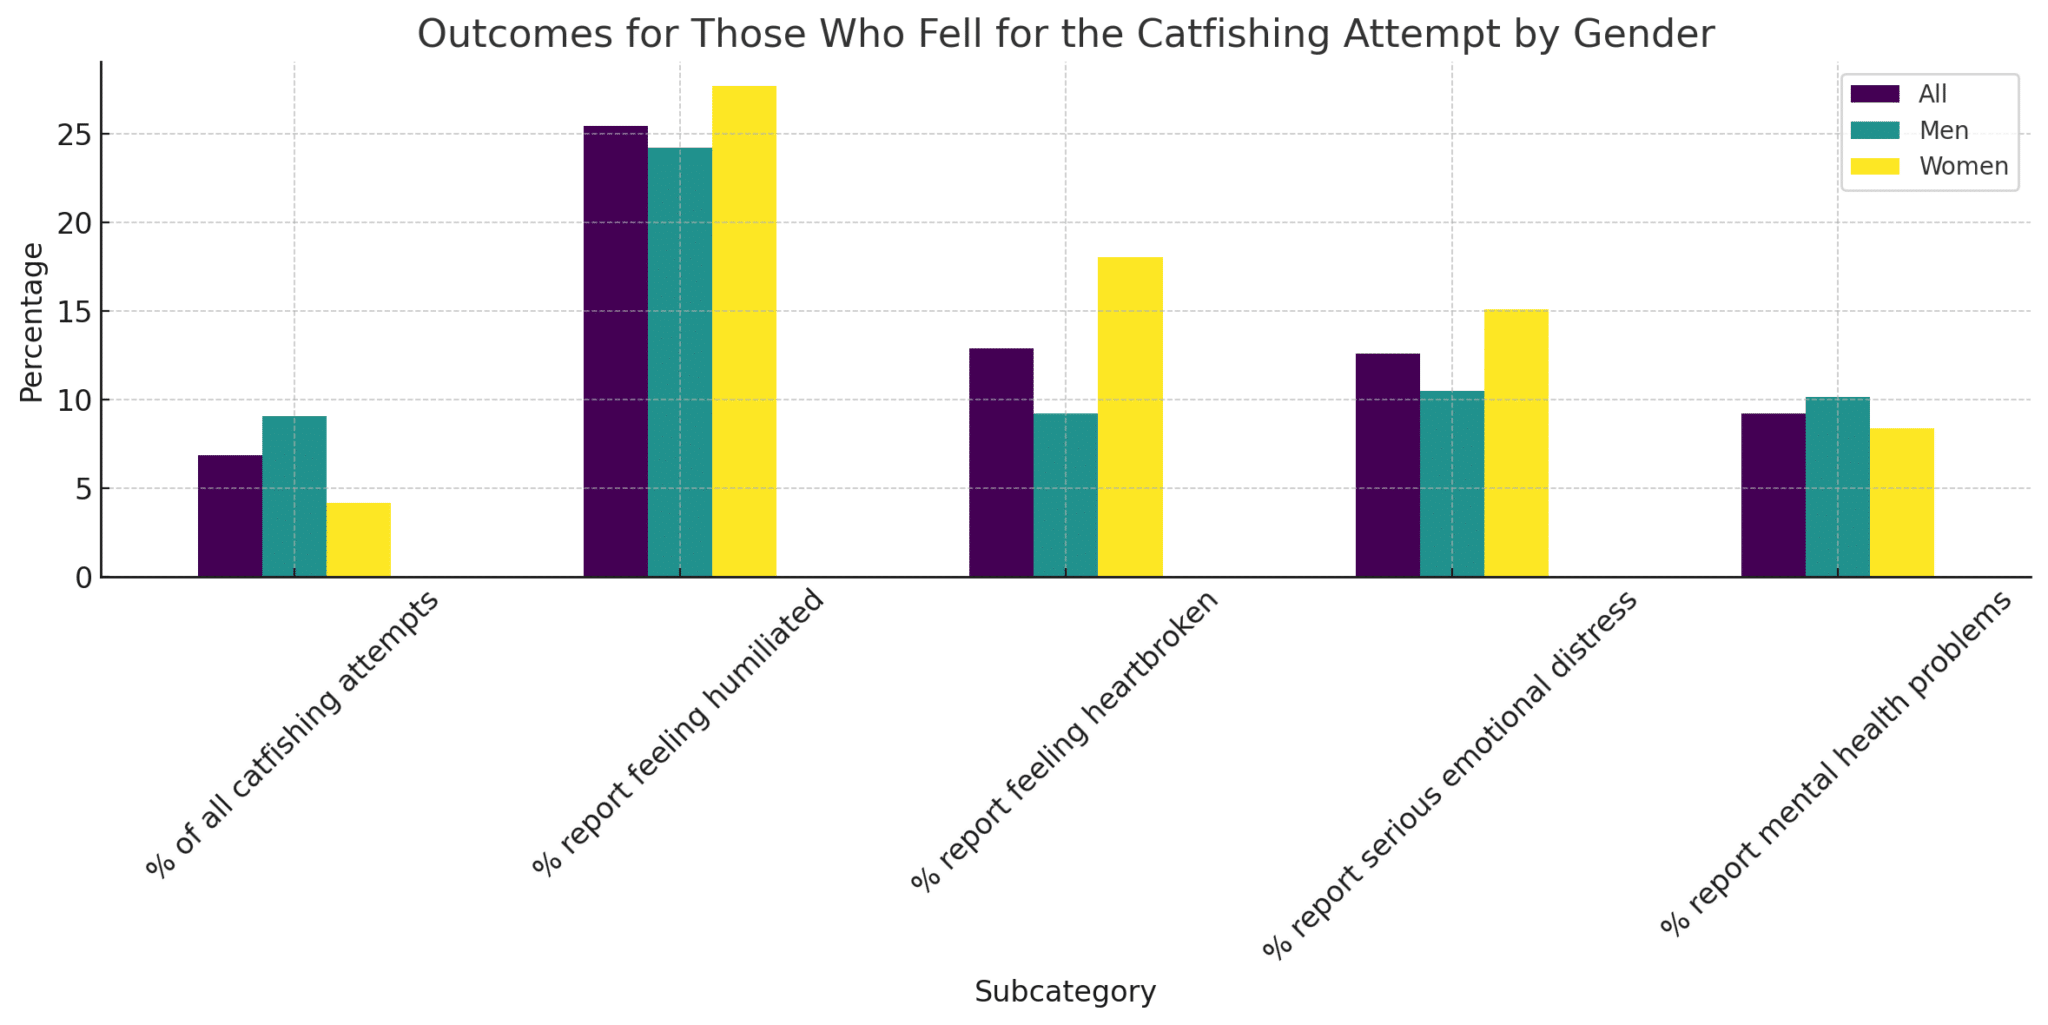 Outcomes for Those Who Fell for the Catfishing Attempt